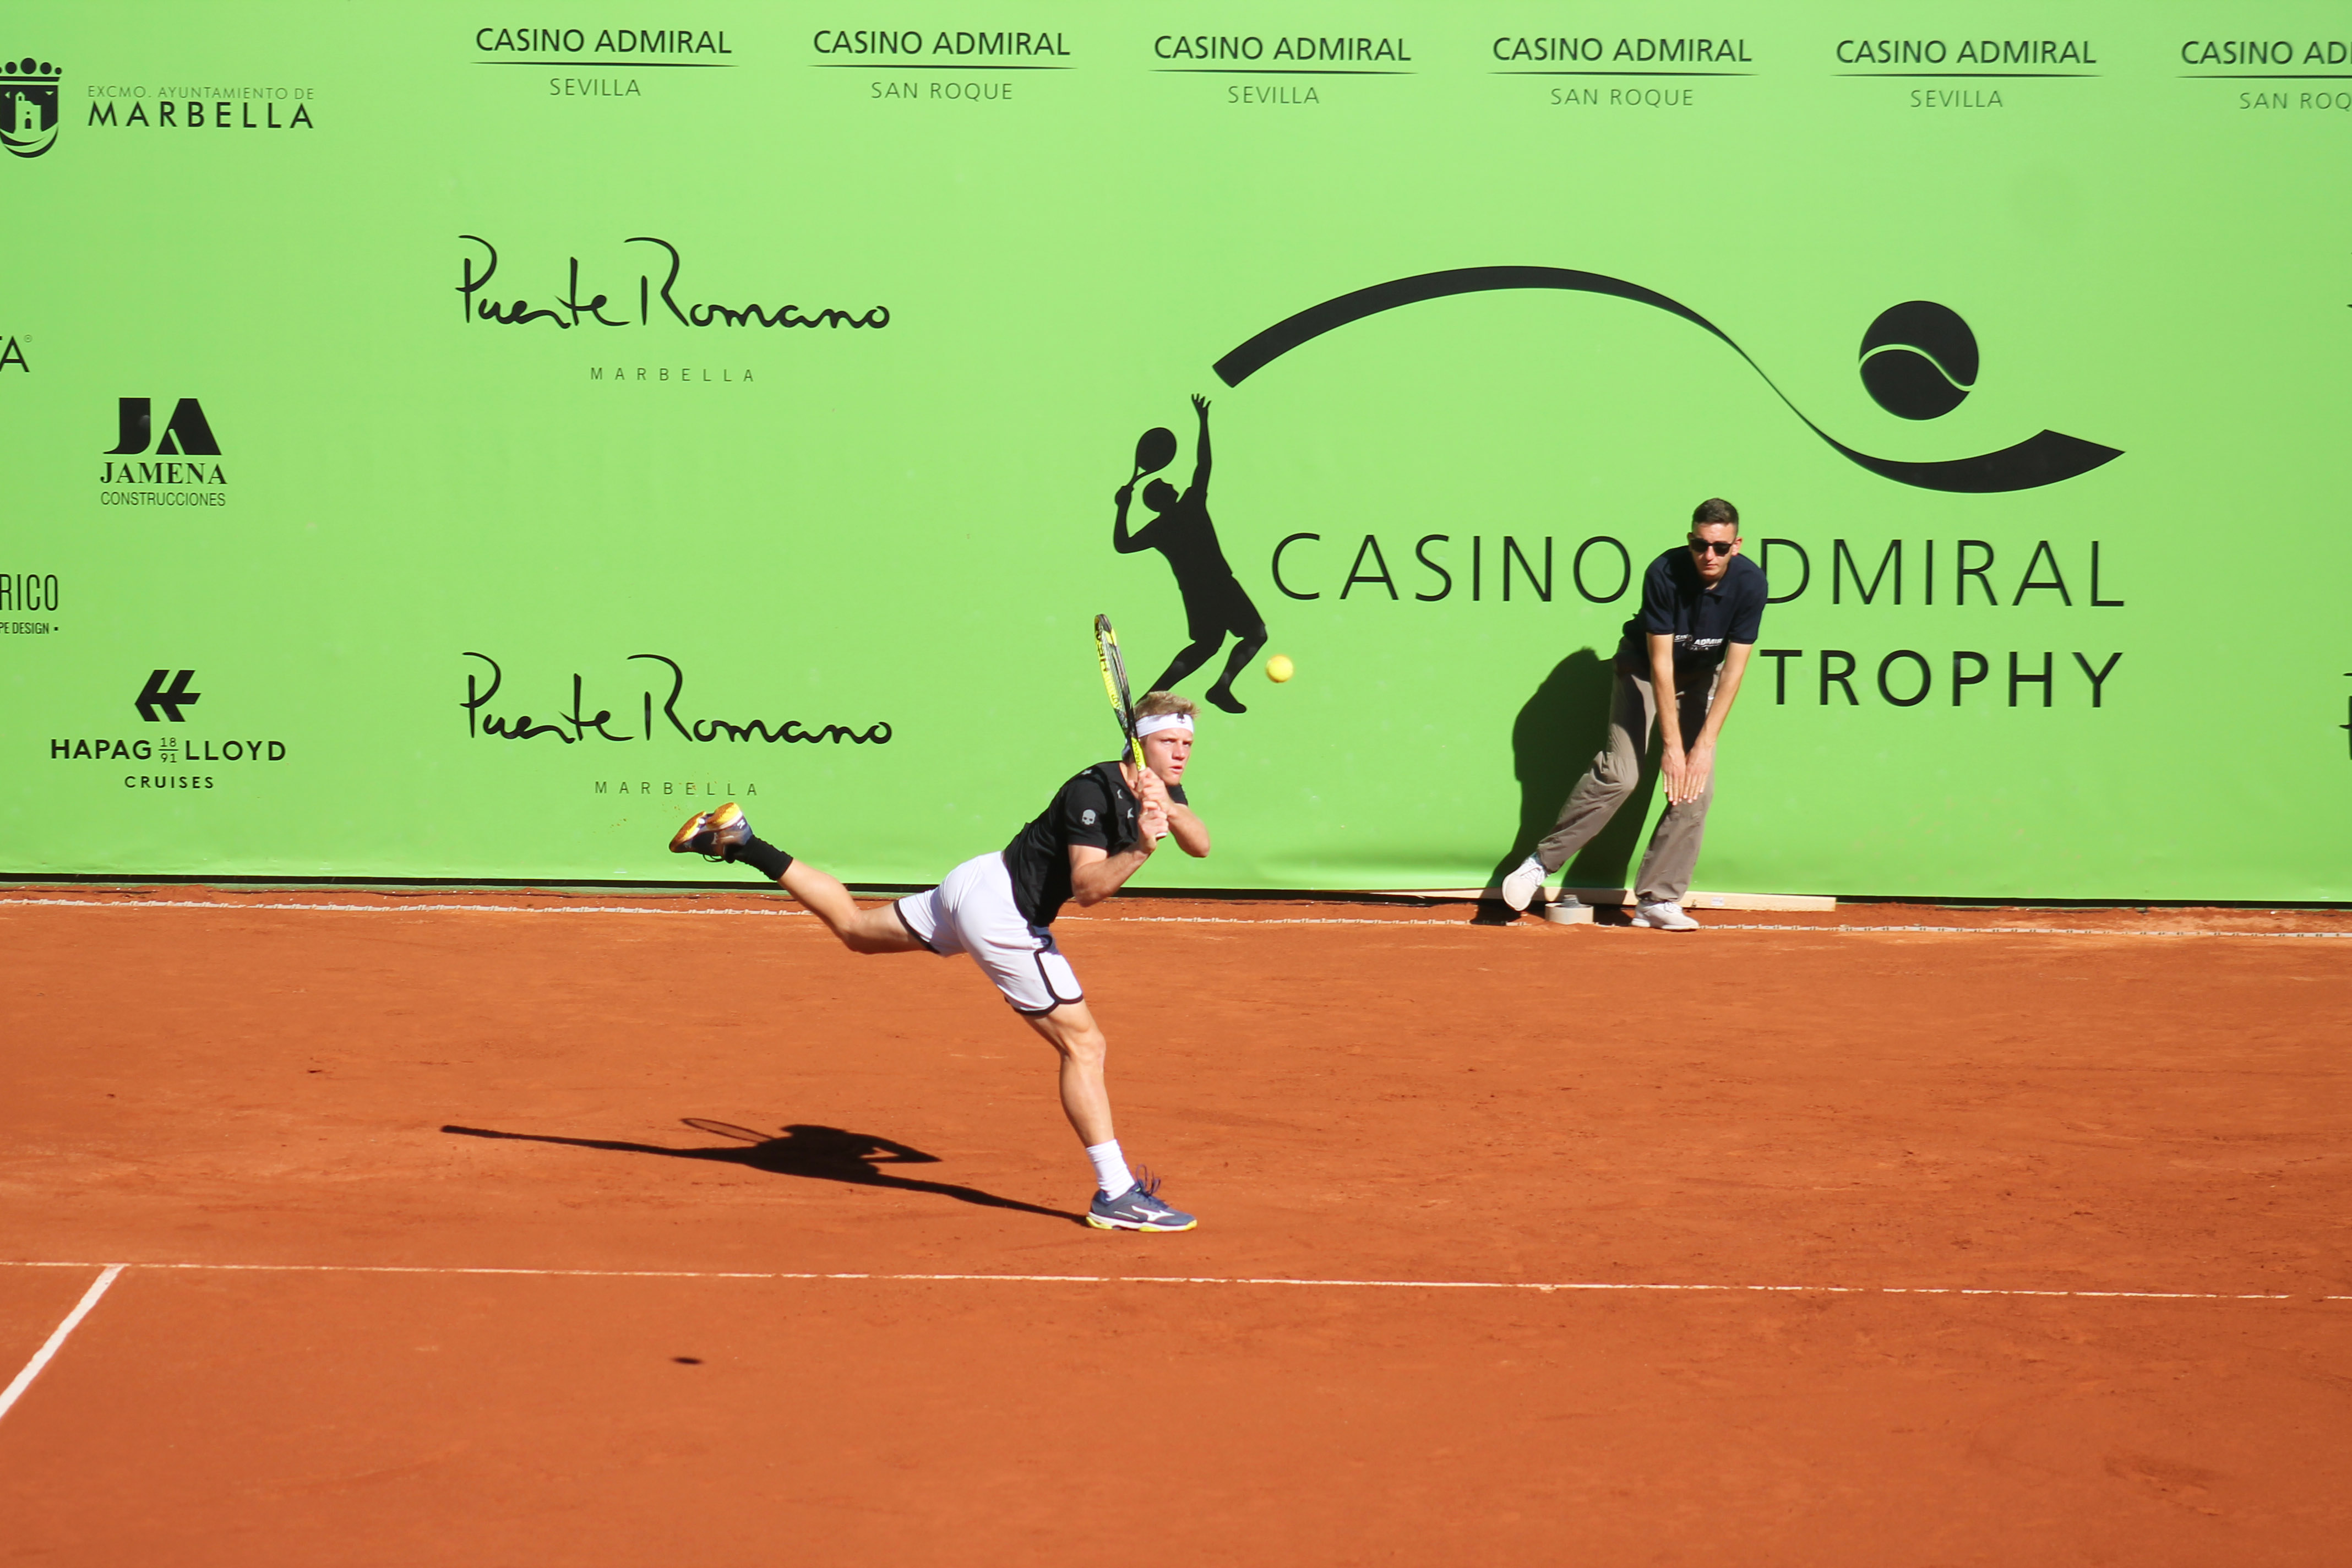 The ATP Challenger Casino Admiral Trophy will program a Spring Festival